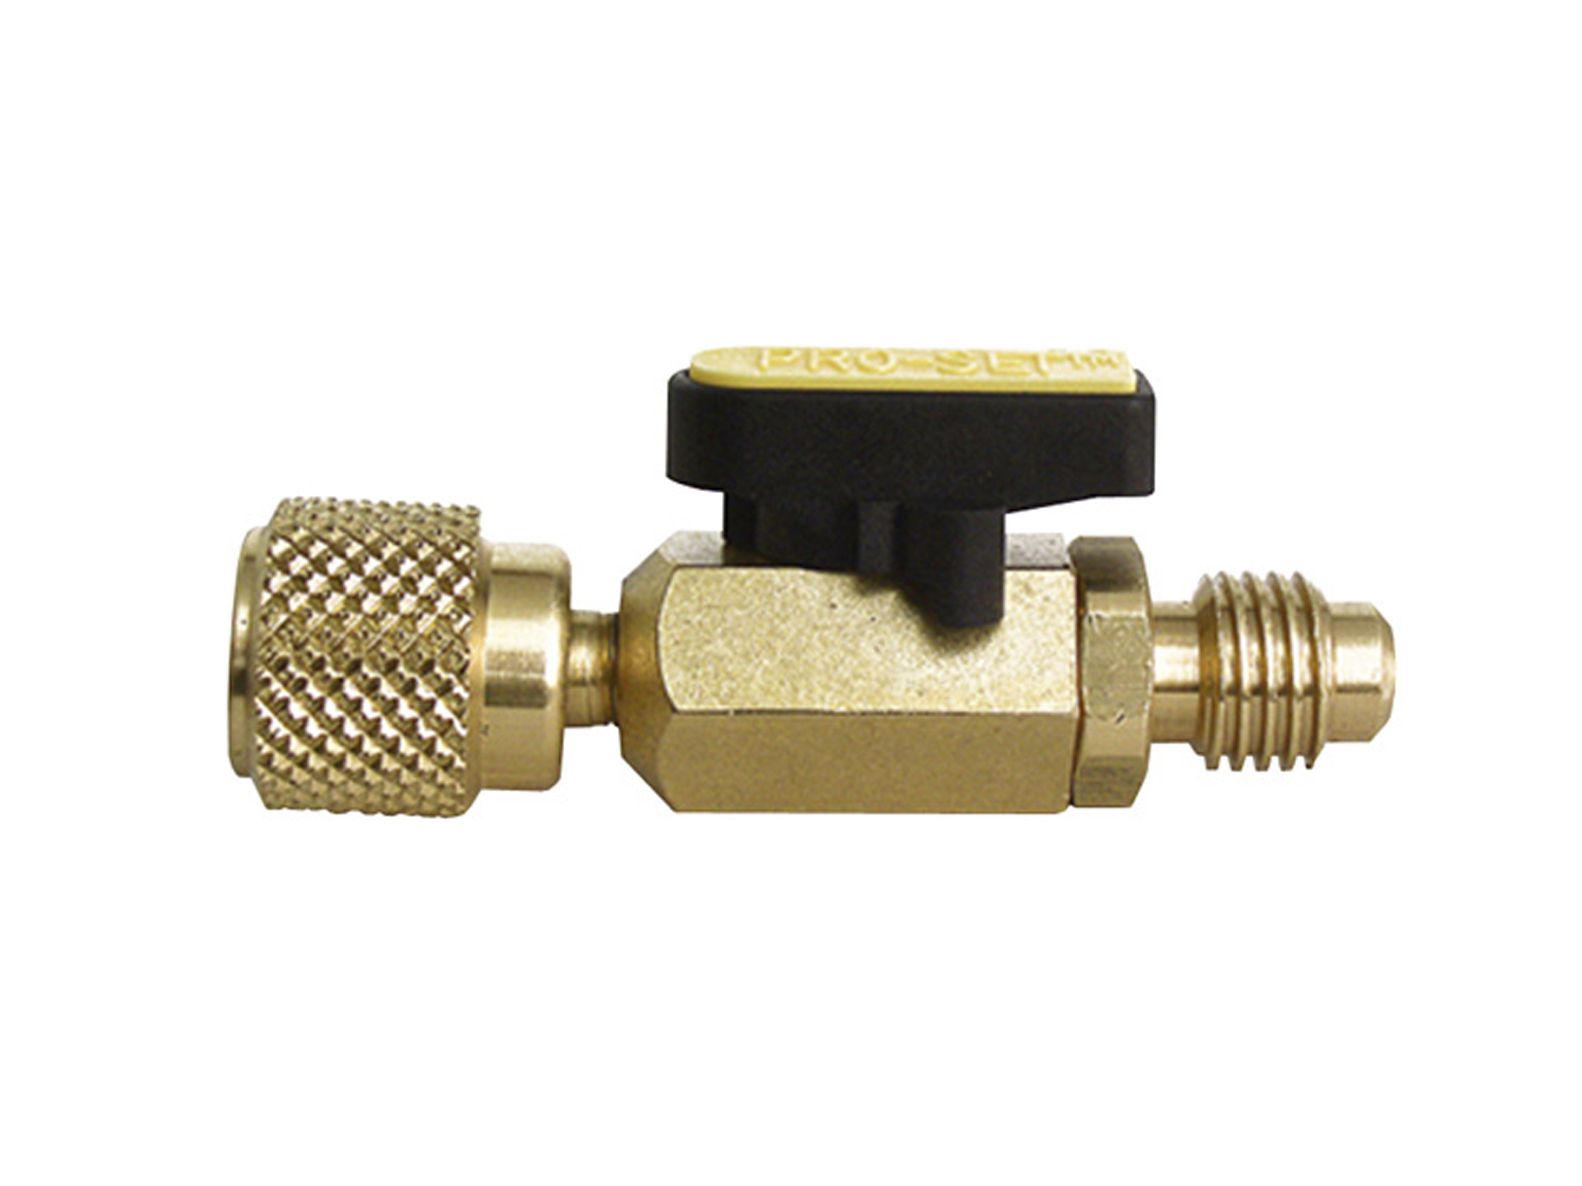 Air Conditioner Shut-Off Ball Valve Adapter For HVAC A/C Automotive Service Tool